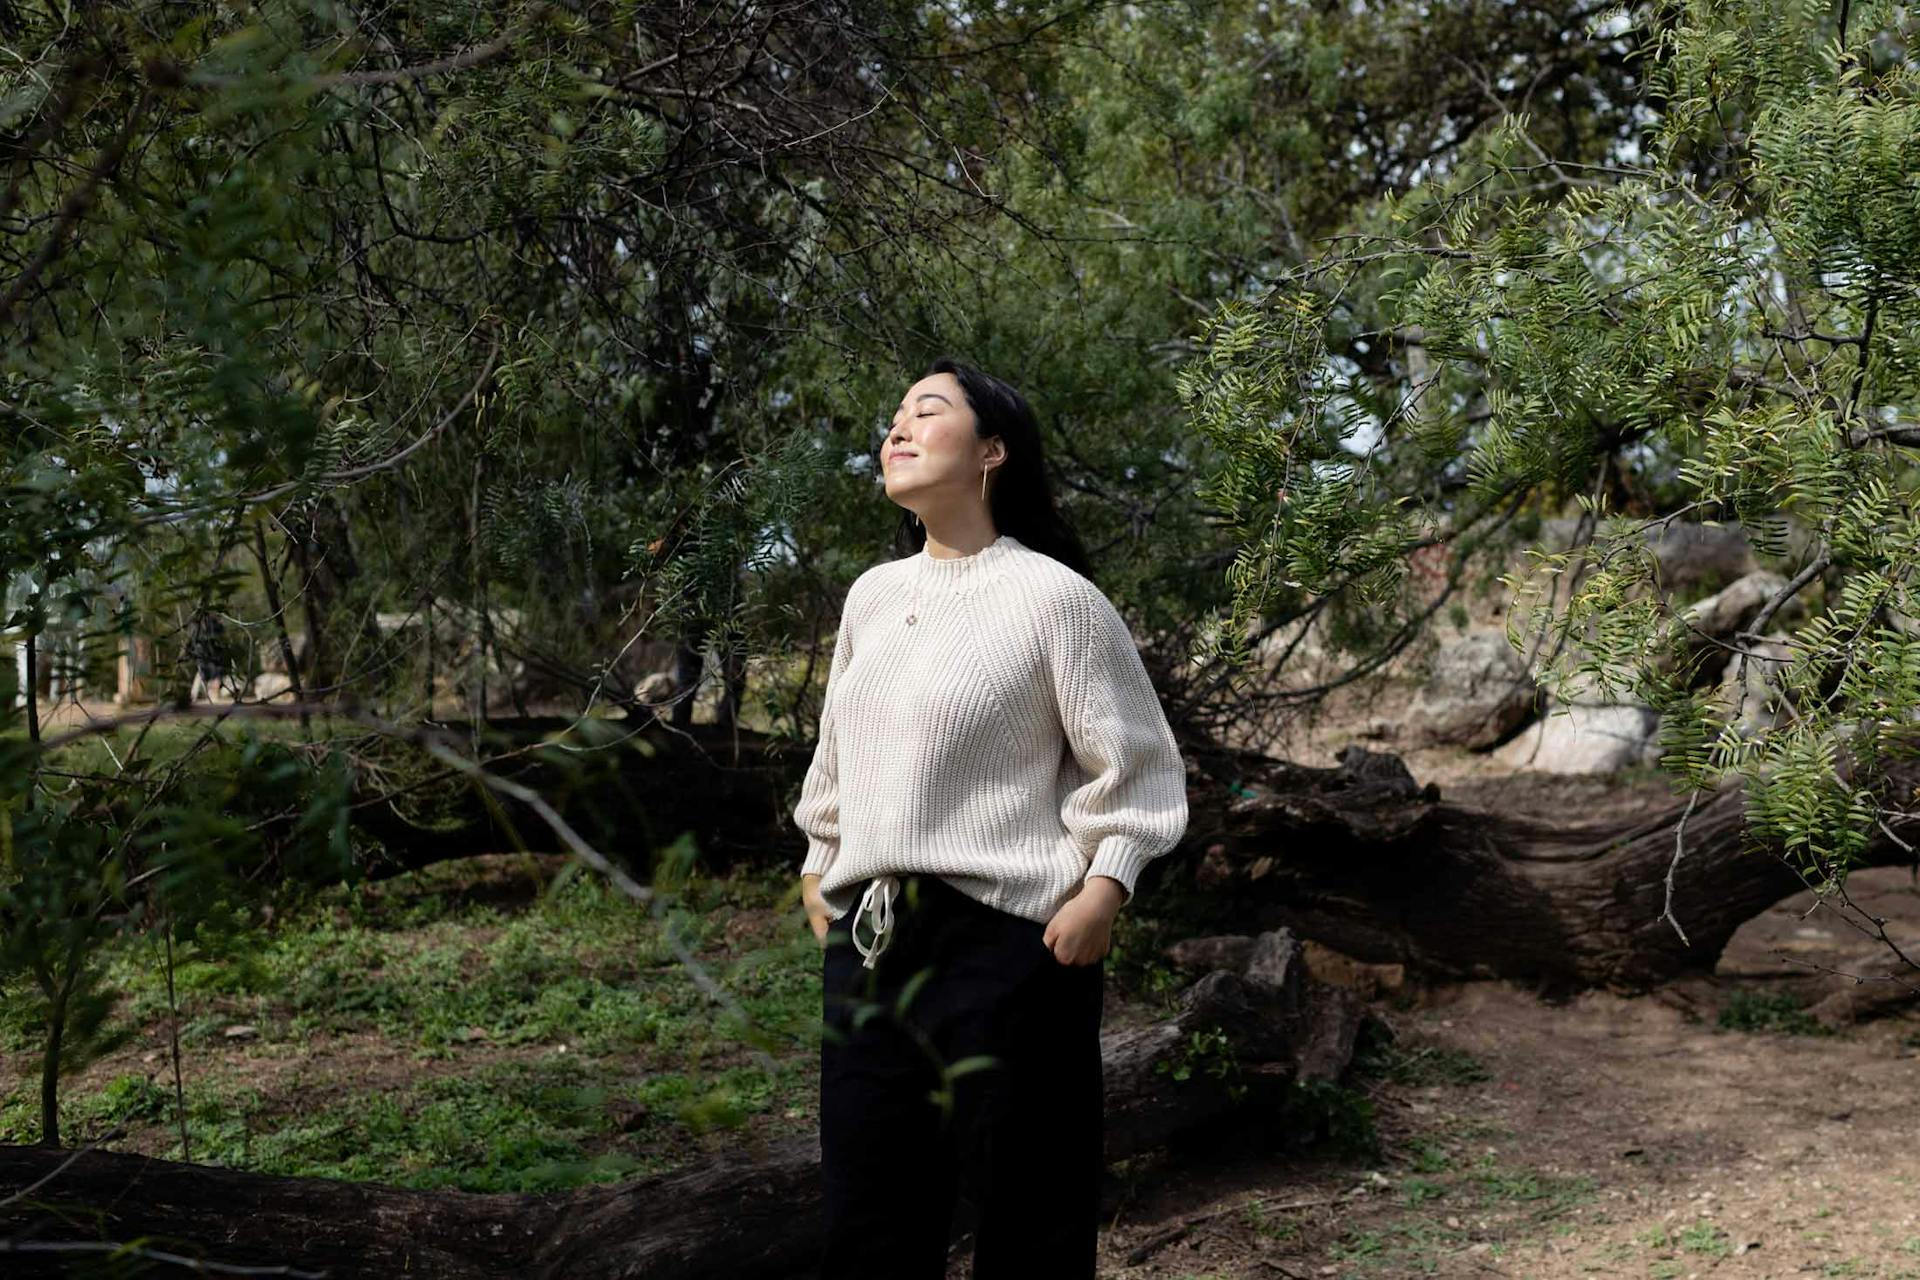 Victoria Song standing in nature wearing a light blouse and dark trousers